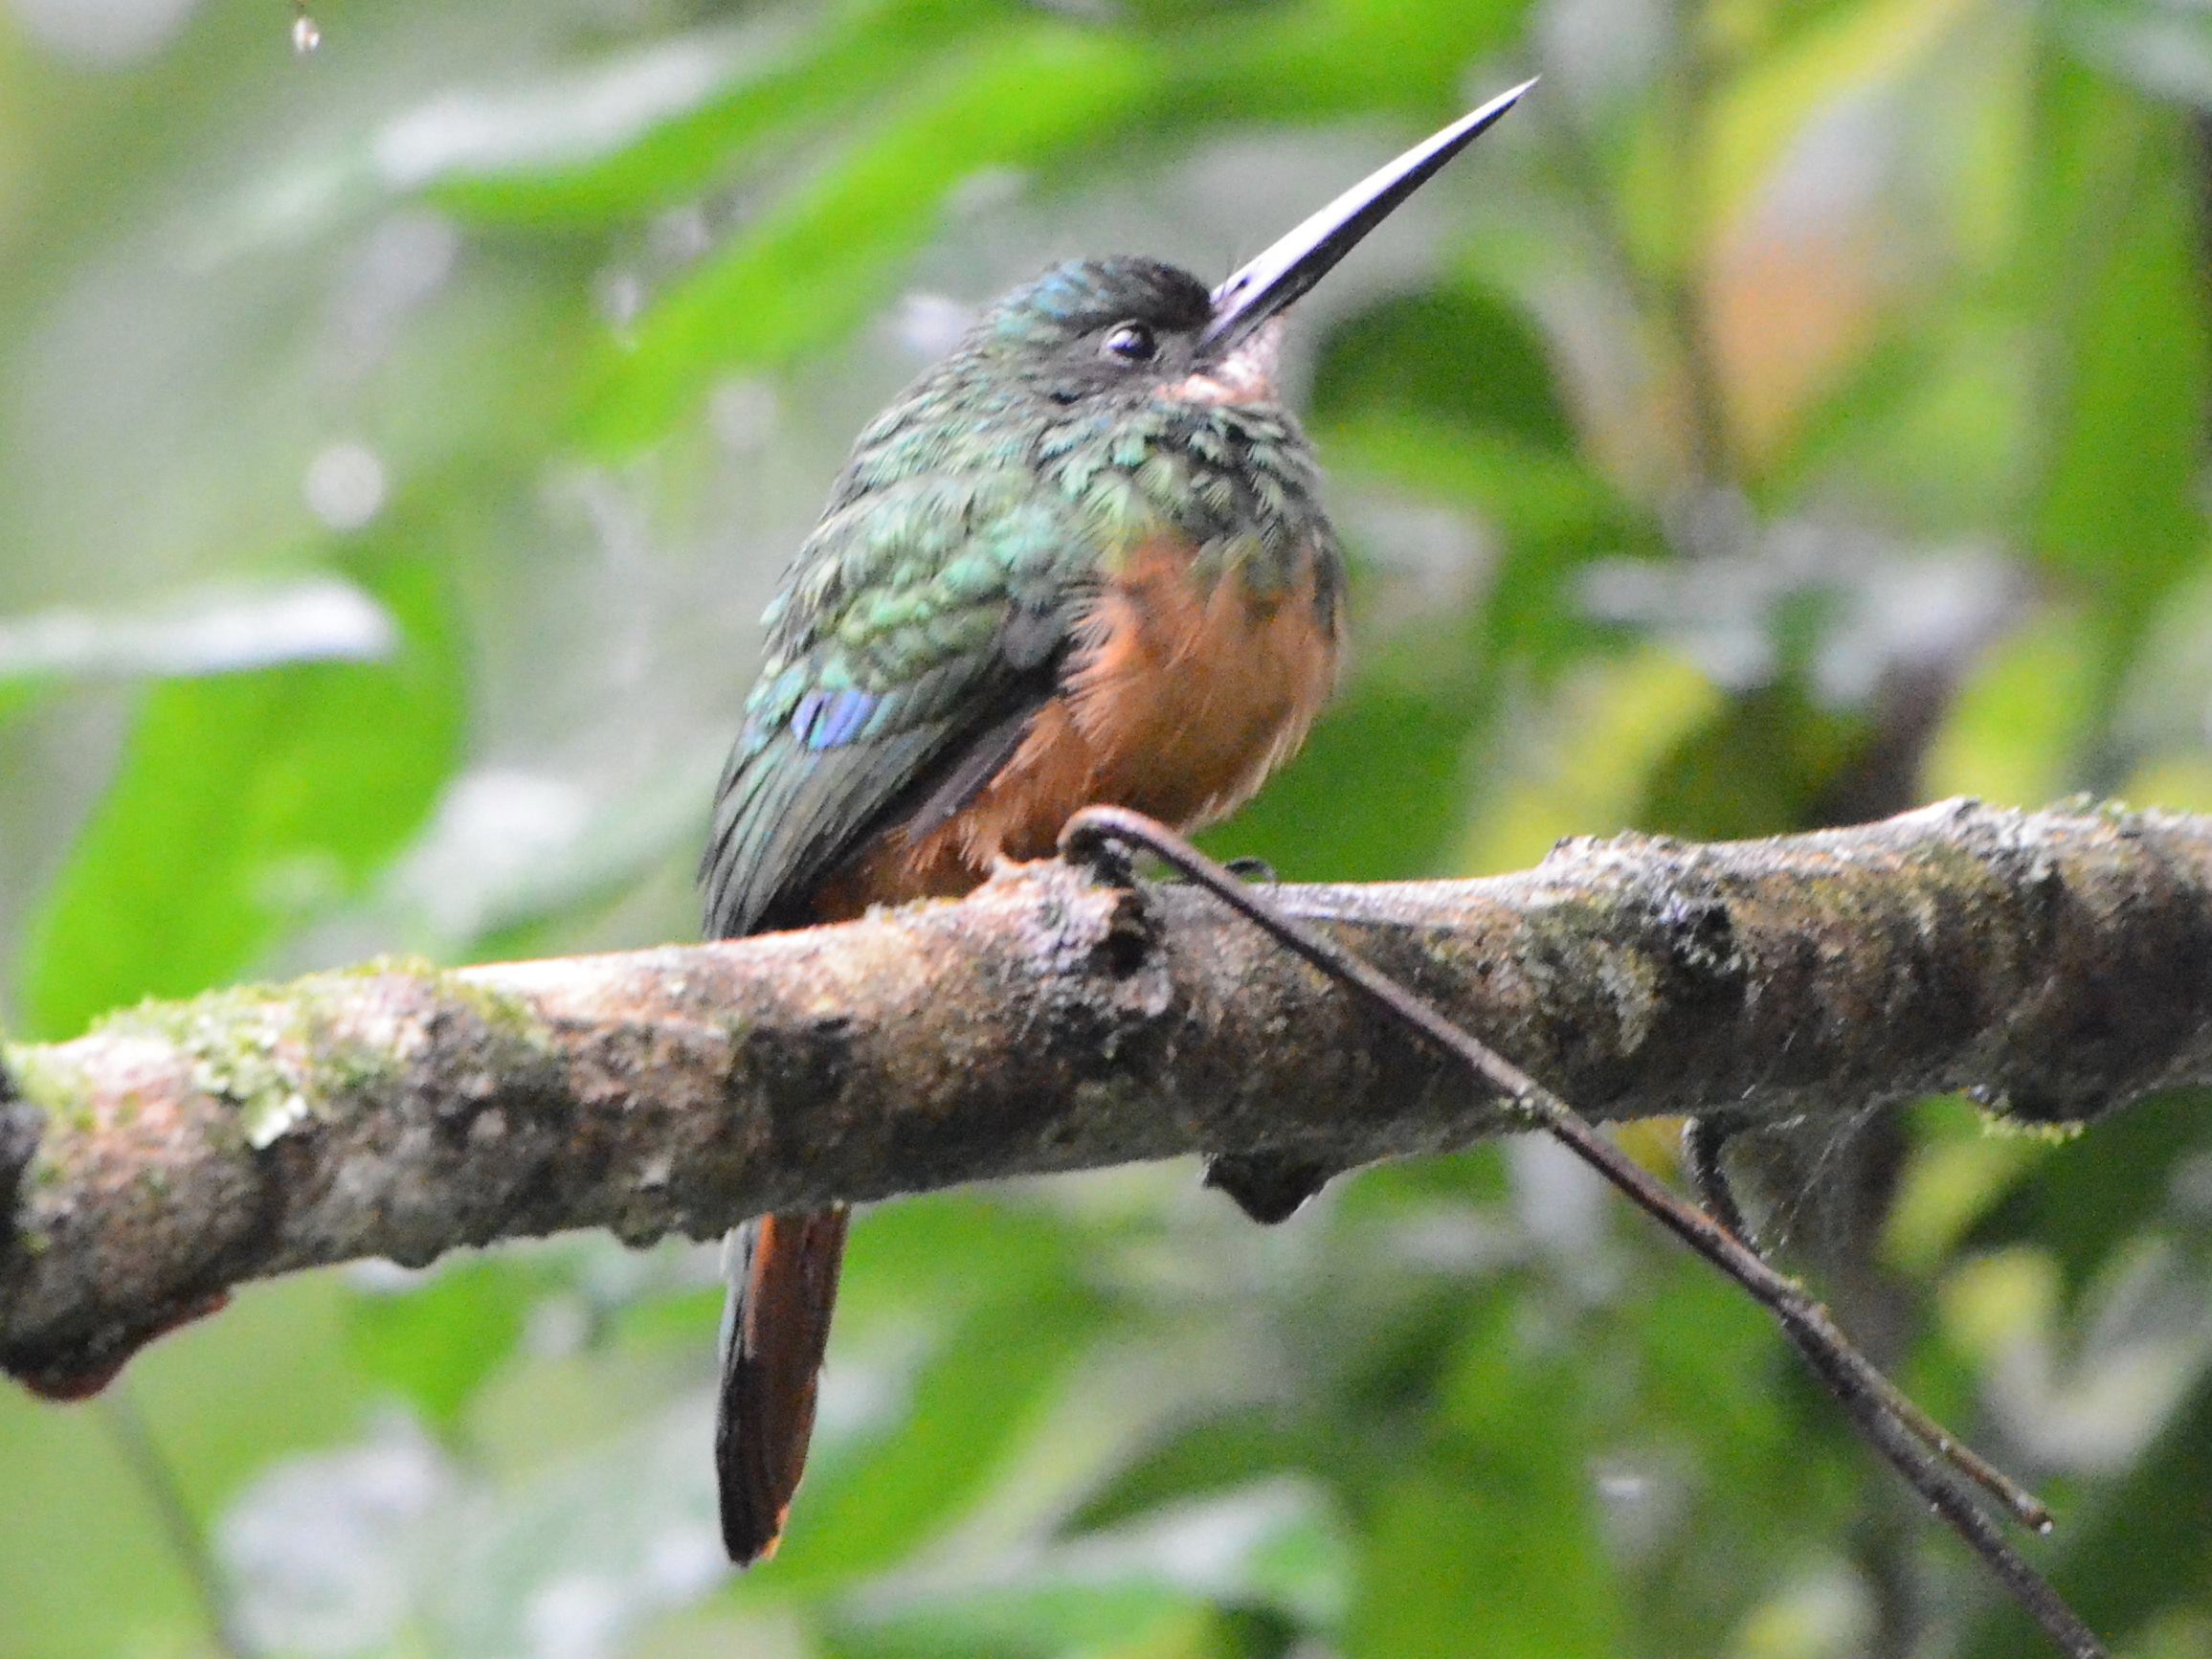 Click picture to see more Rufous-tailed Jacamars.